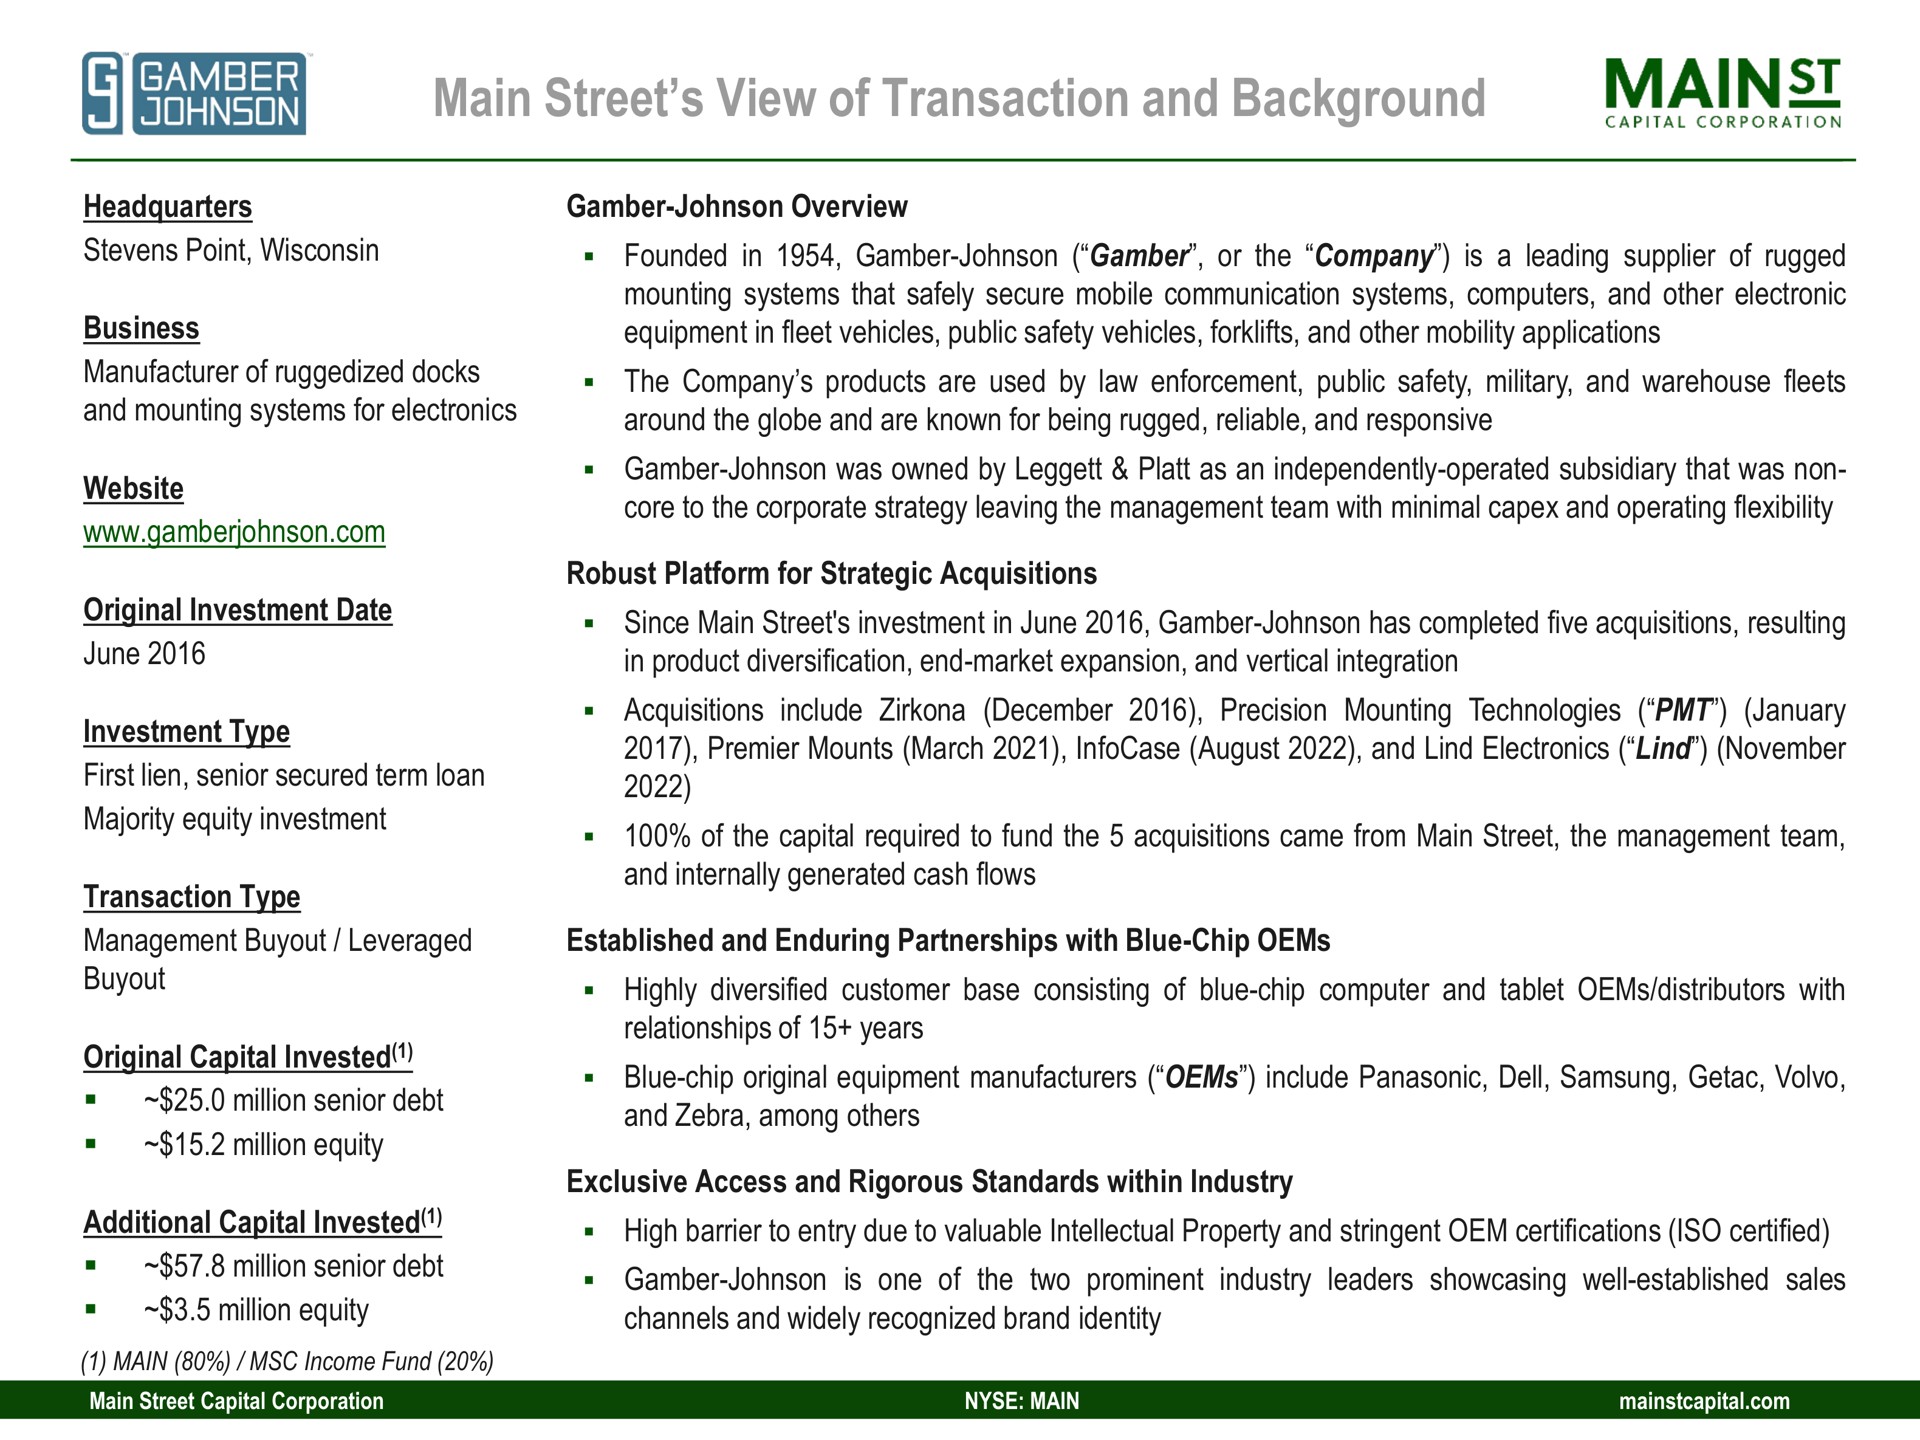 main street view of transaction and background | Main Street Capital